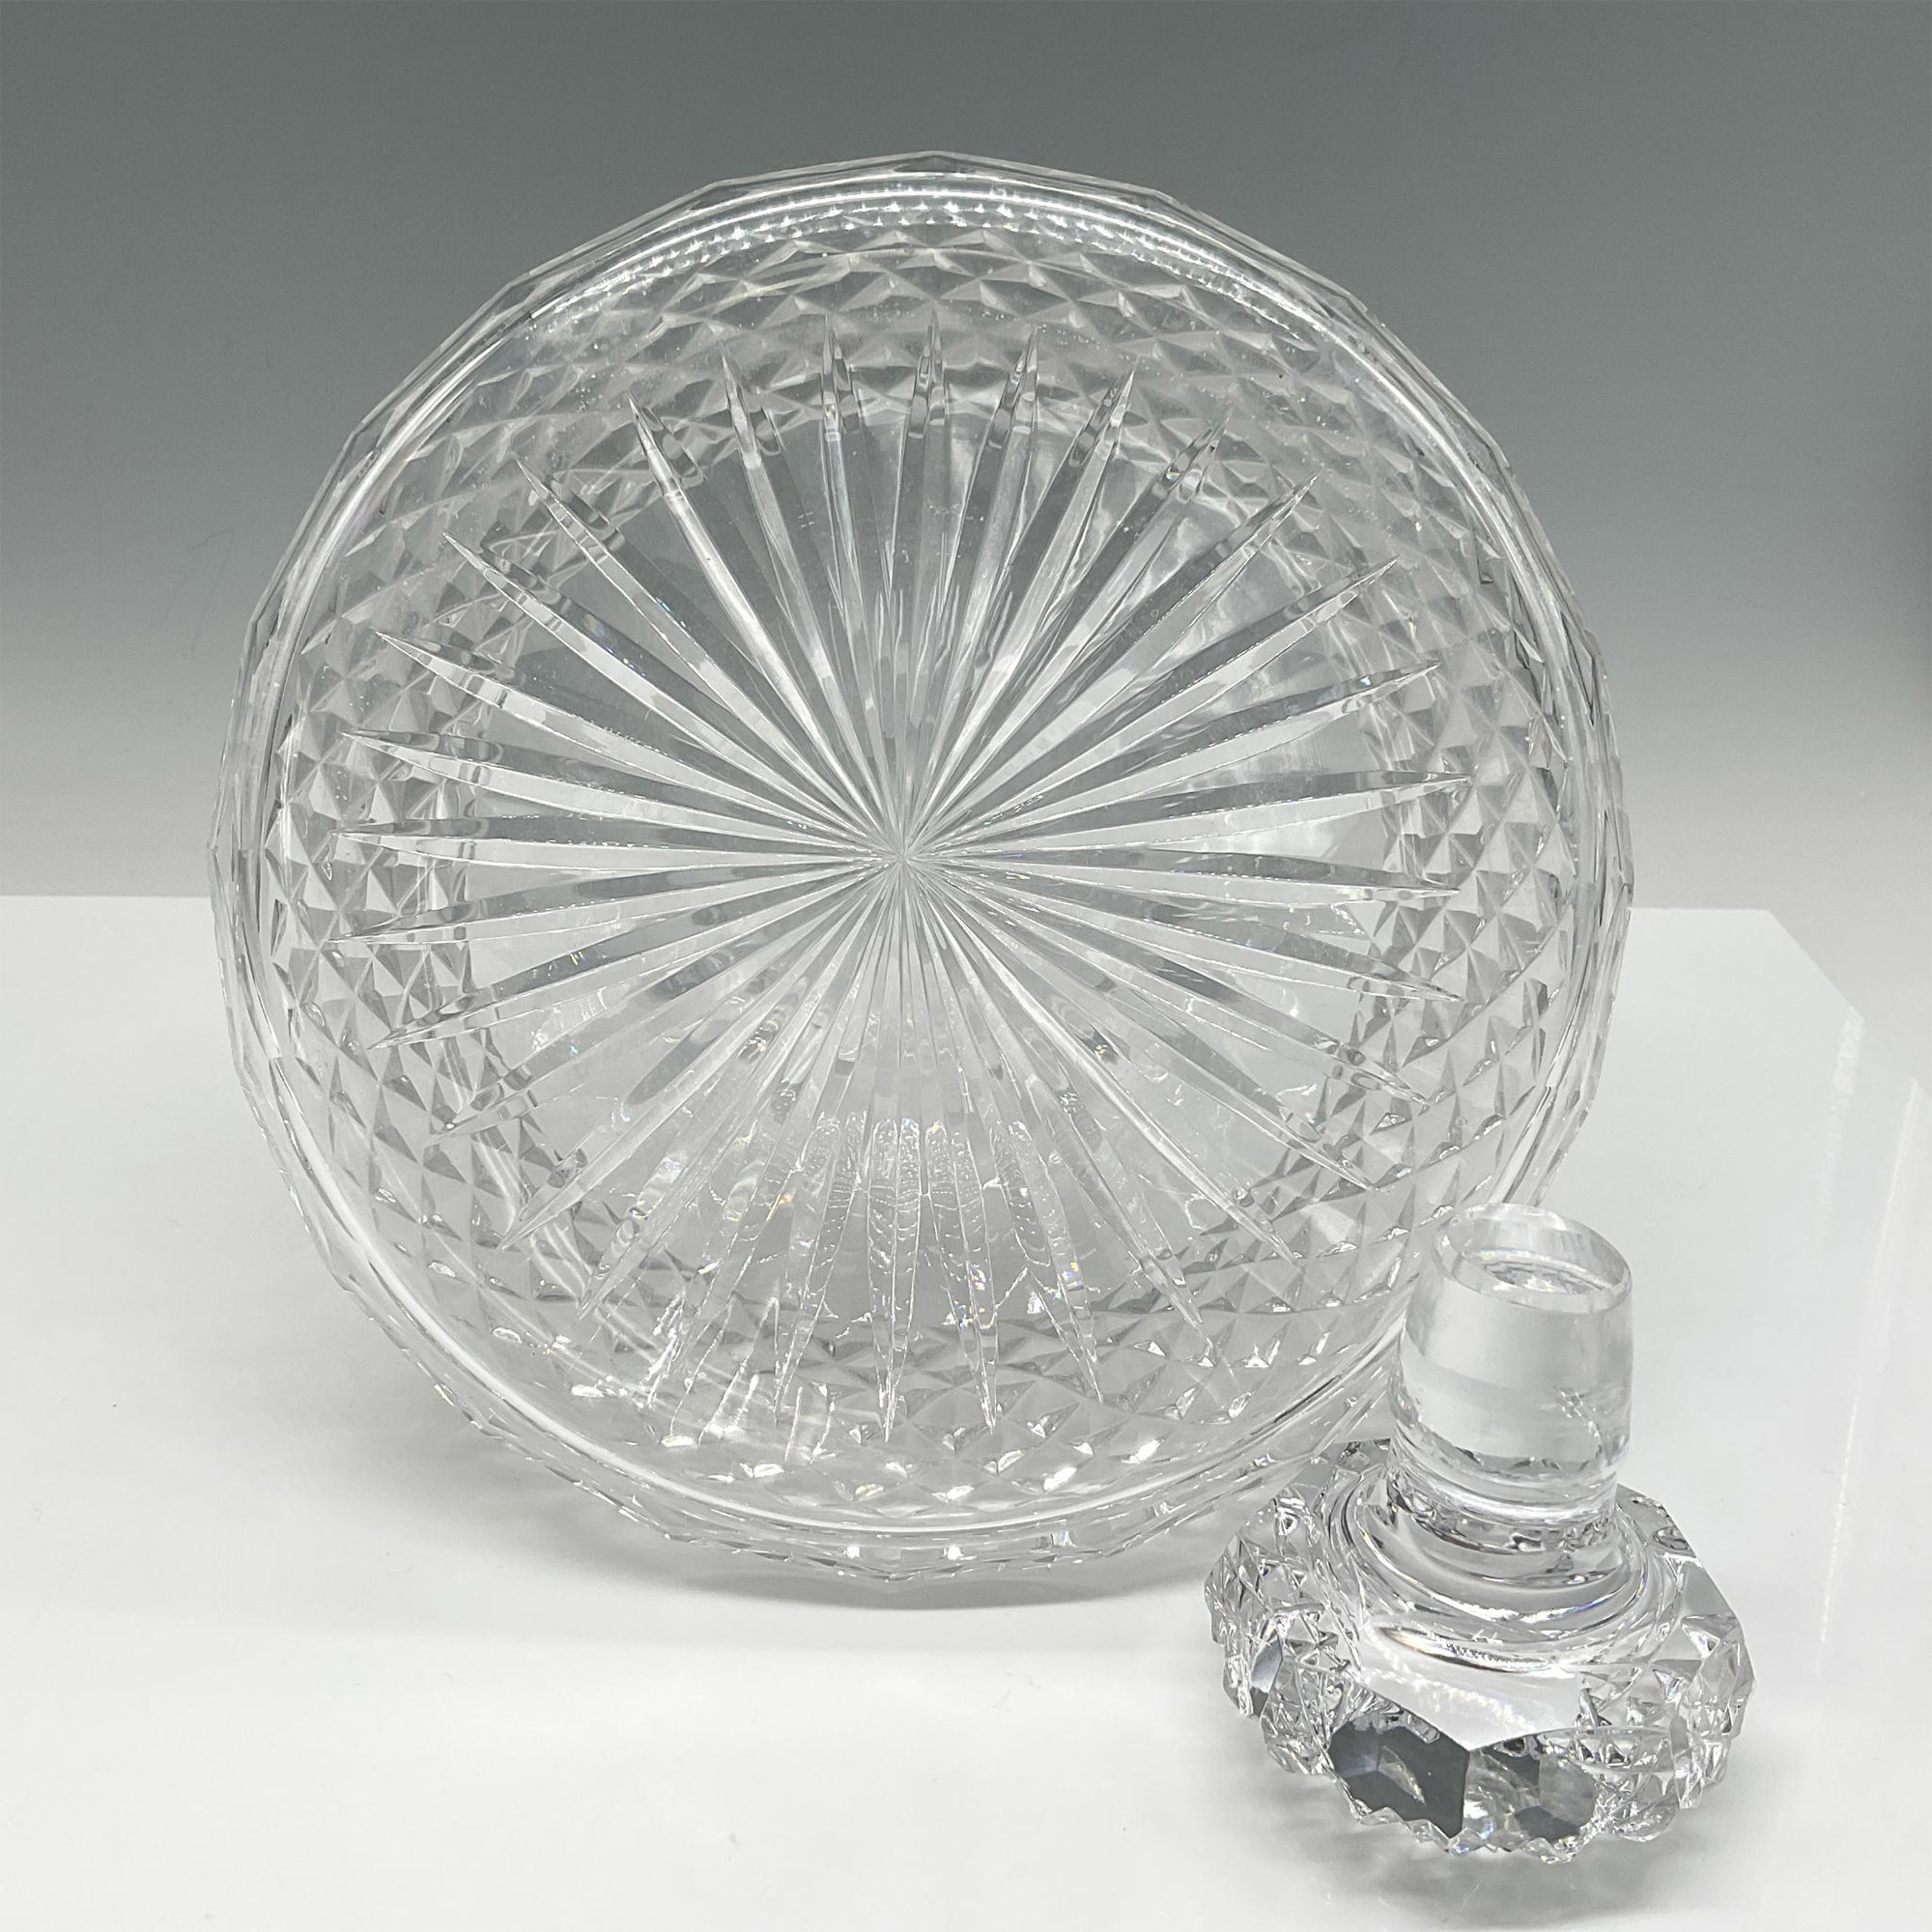 Galway Irish Crystal Decanter with Stopper - Image 4 of 4